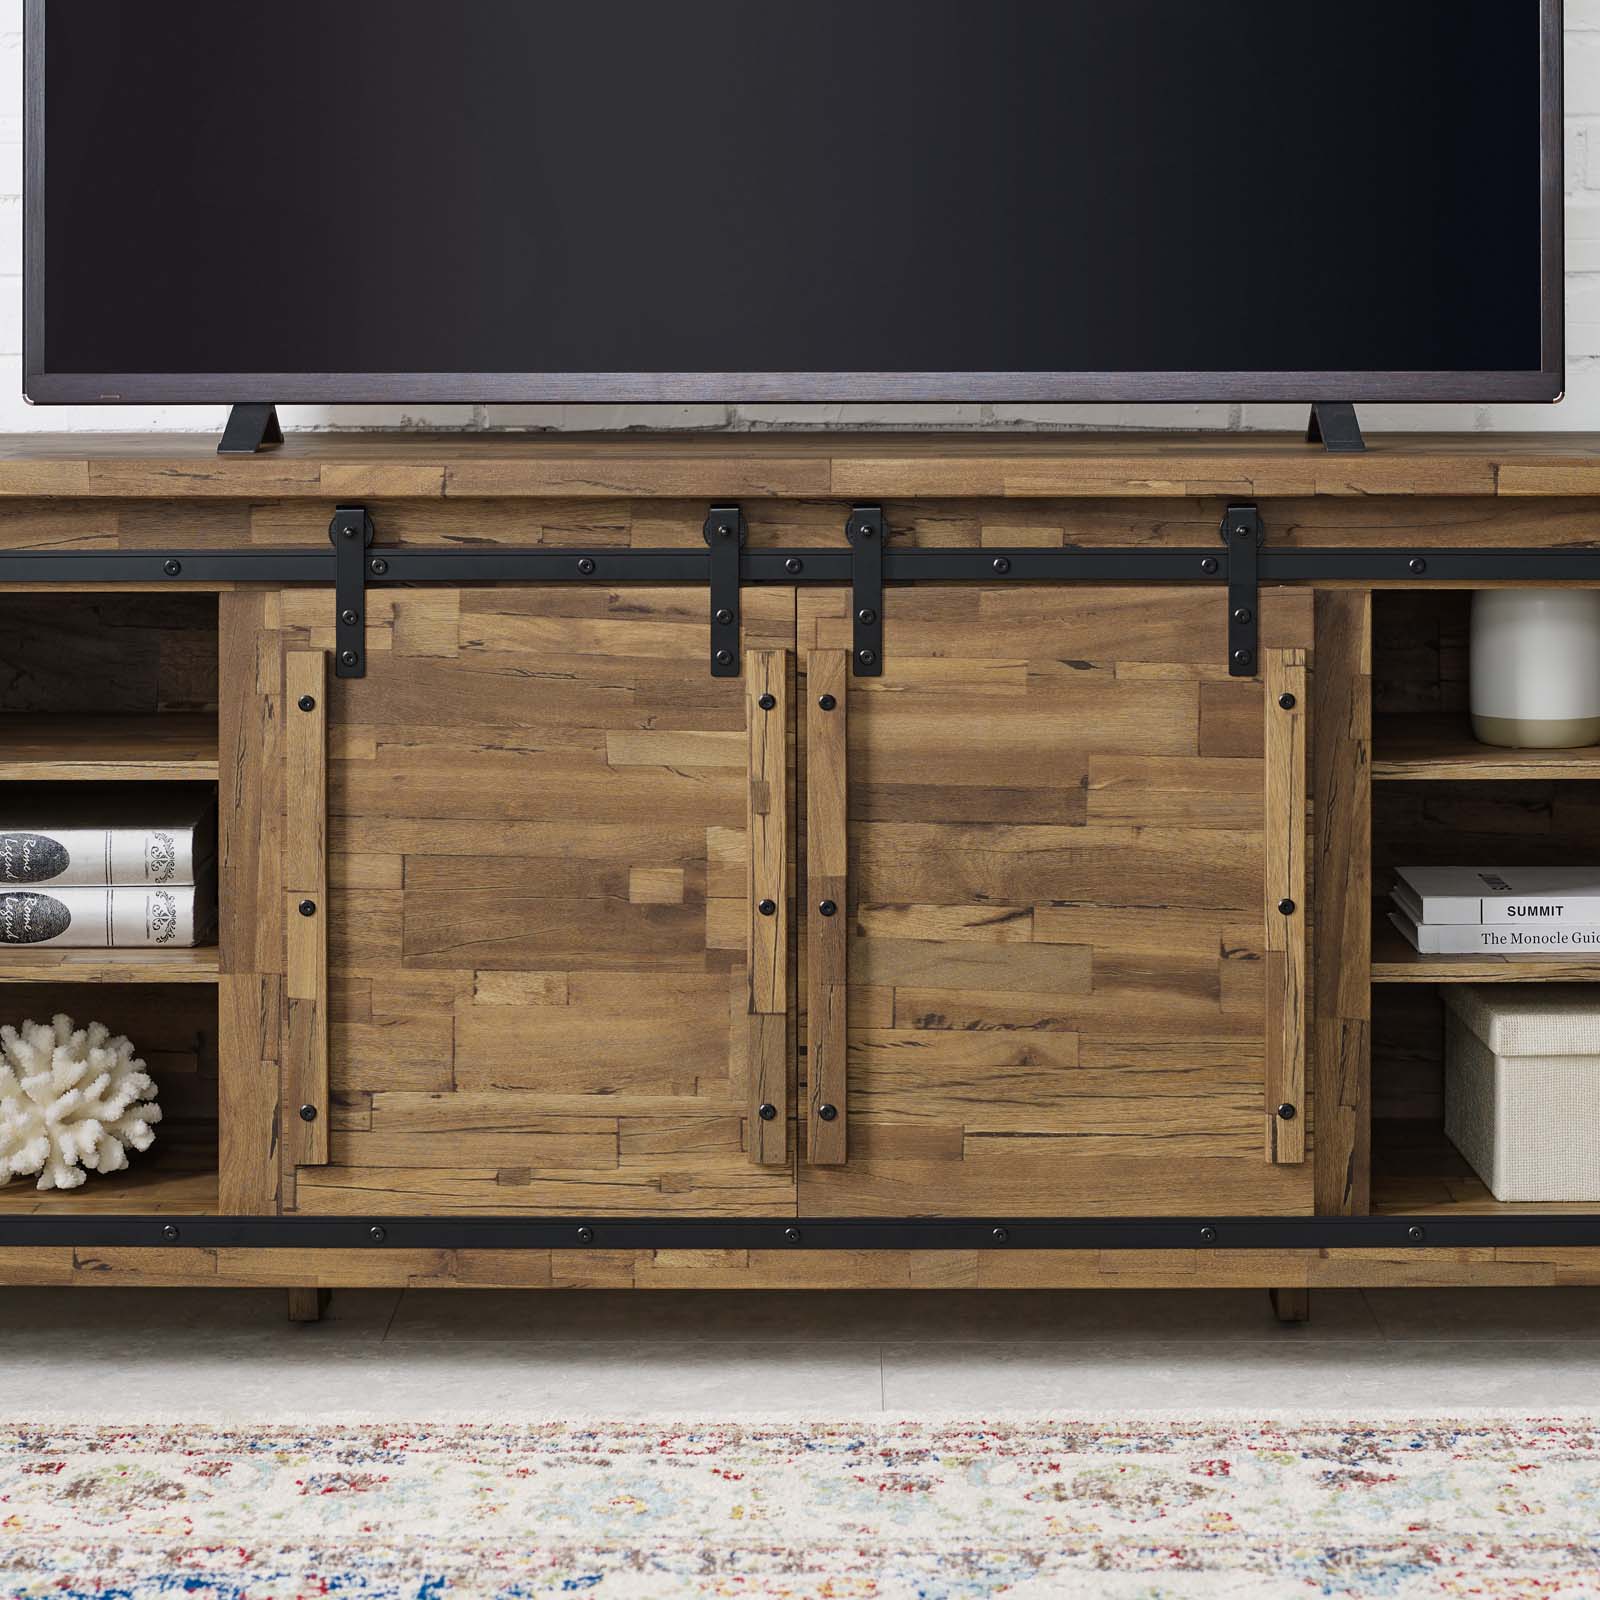 Cheshire 71" Rustic Sliding Door TV Stand - East Shore Modern Home Furnishings